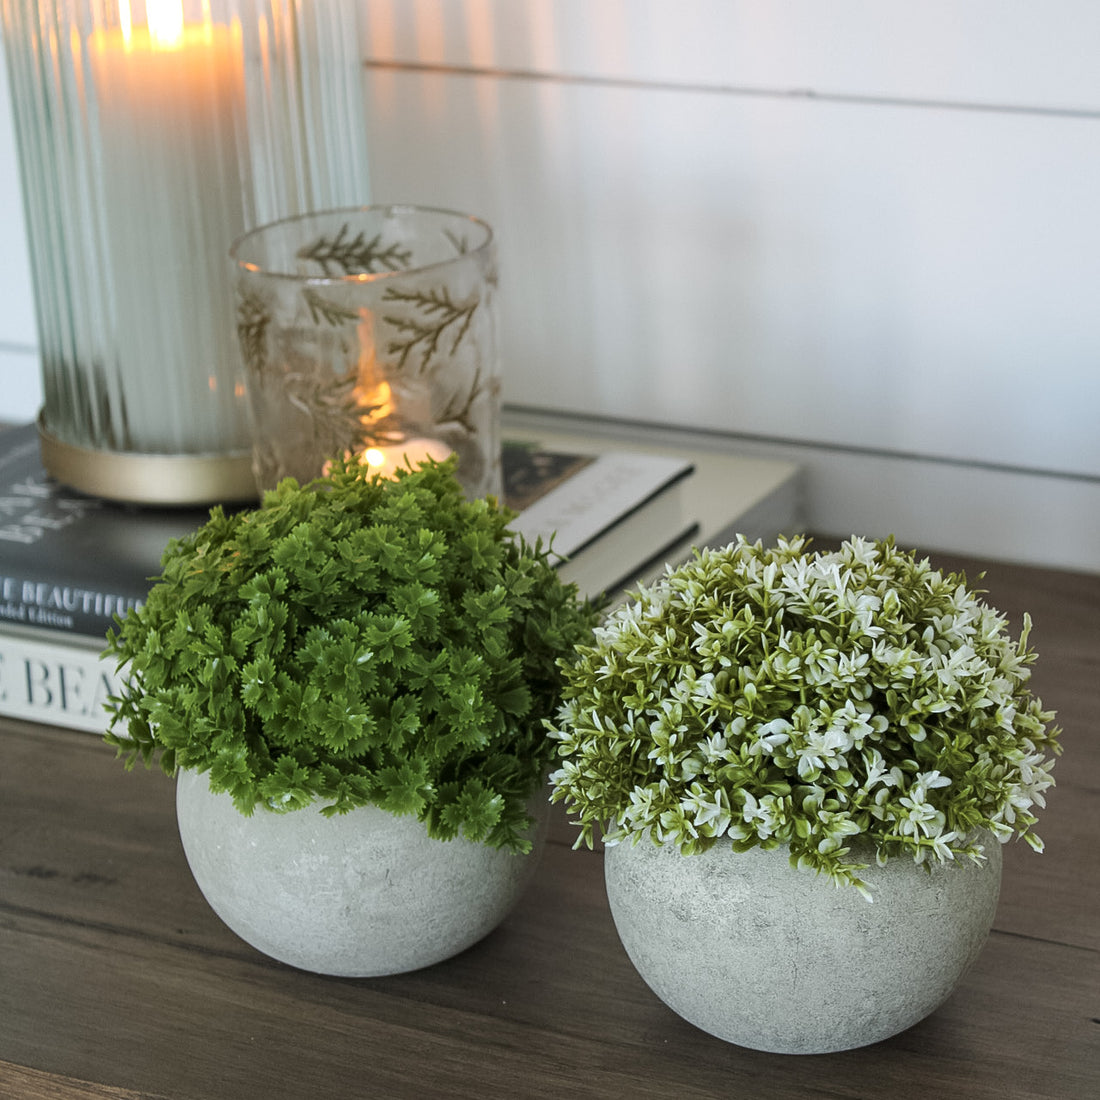 Faux greenery doesn't have to look fake